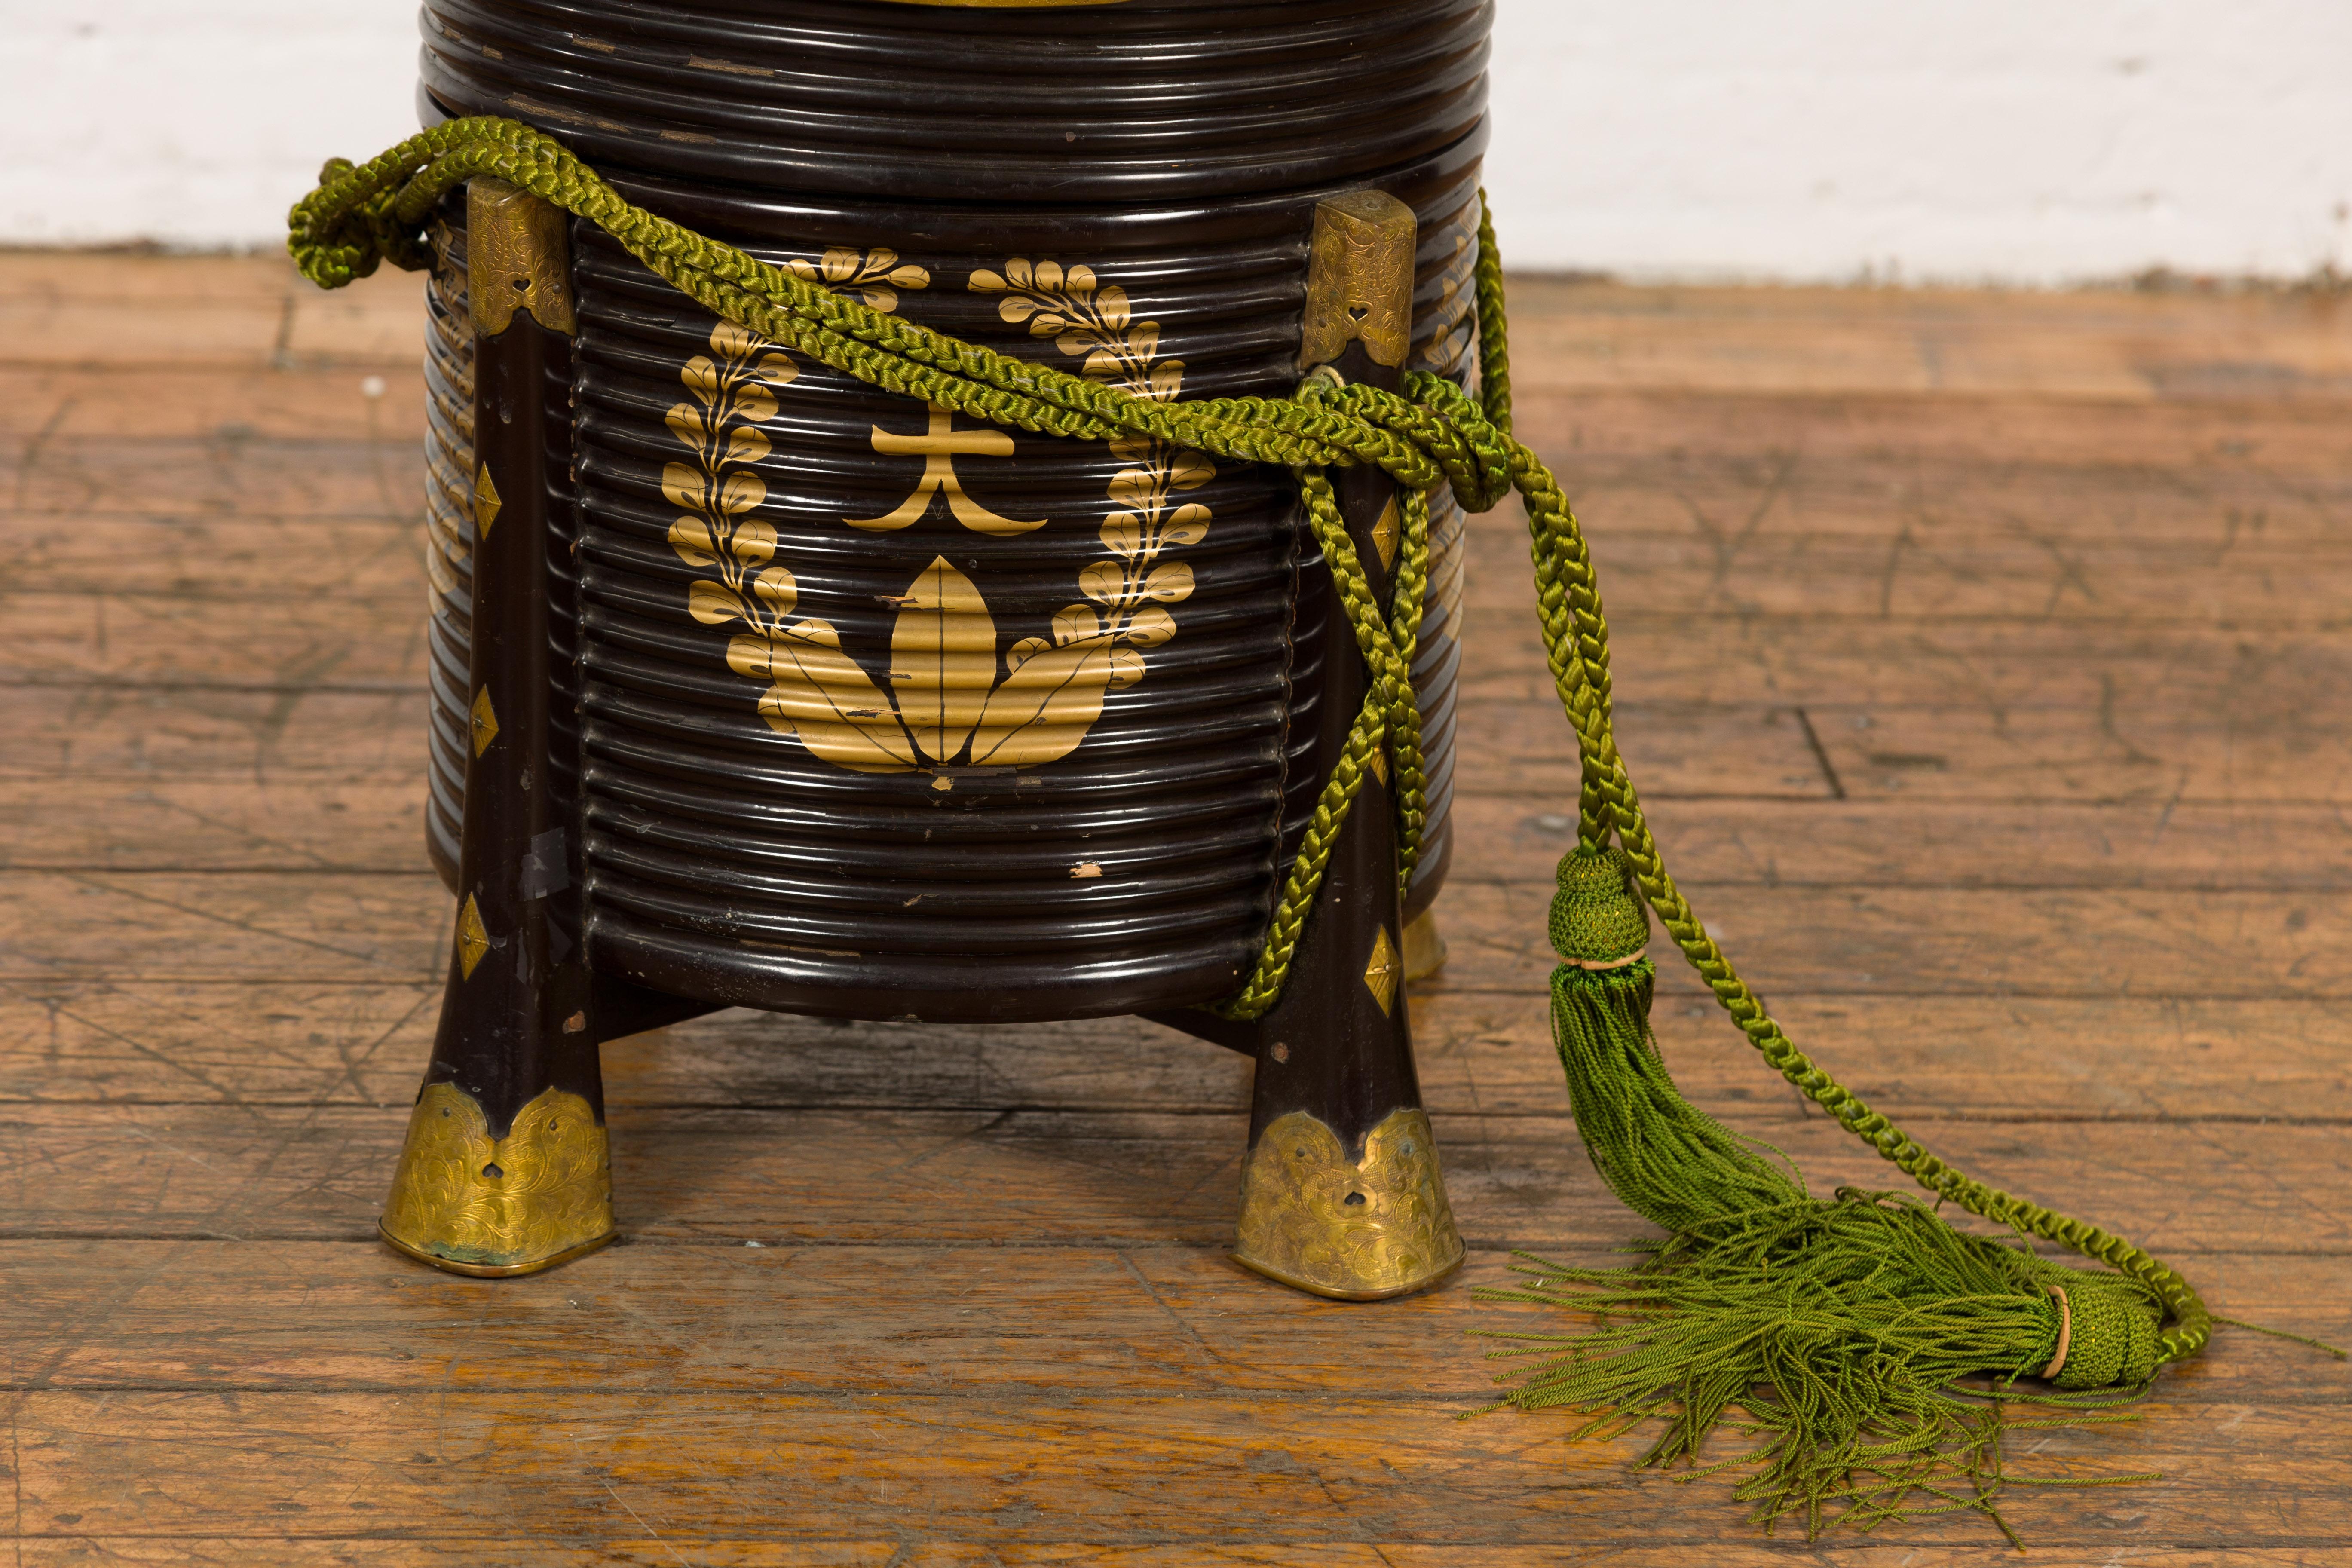 19th Century Japanese Meiji Period Hokai Lidded Box with Brass Accents and Original Rope For Sale